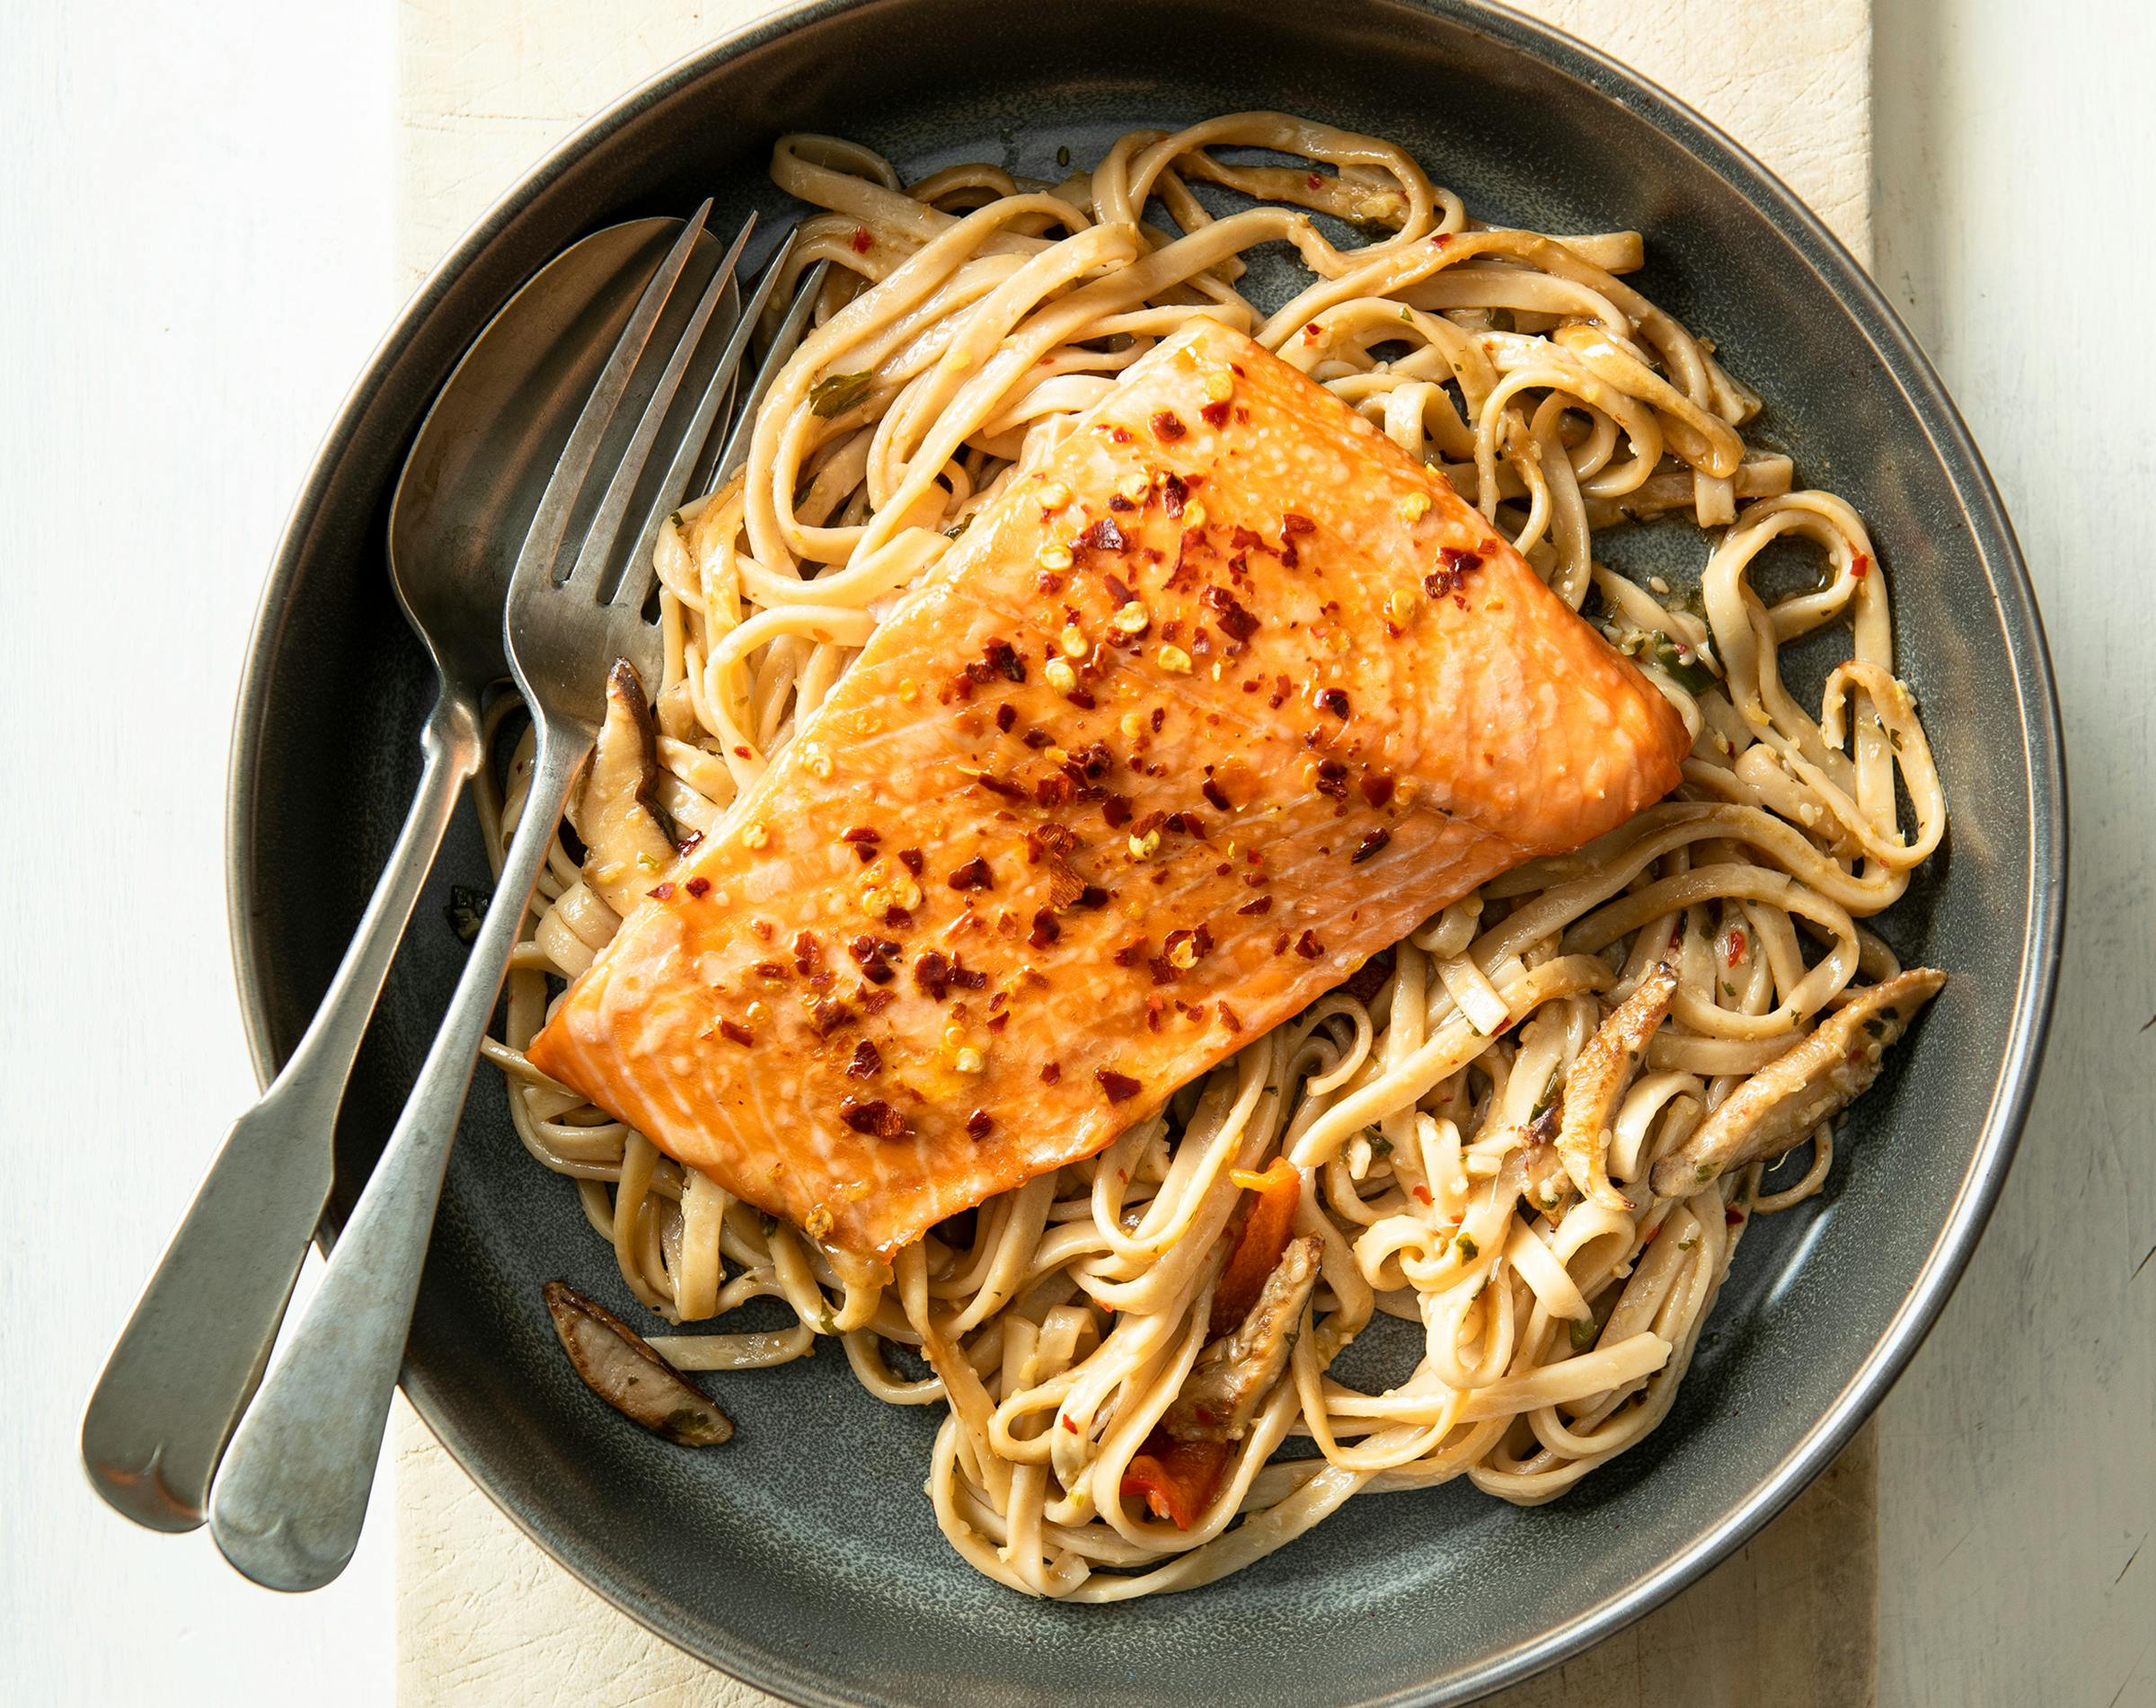 The key to great salmon is cooking it low and slow